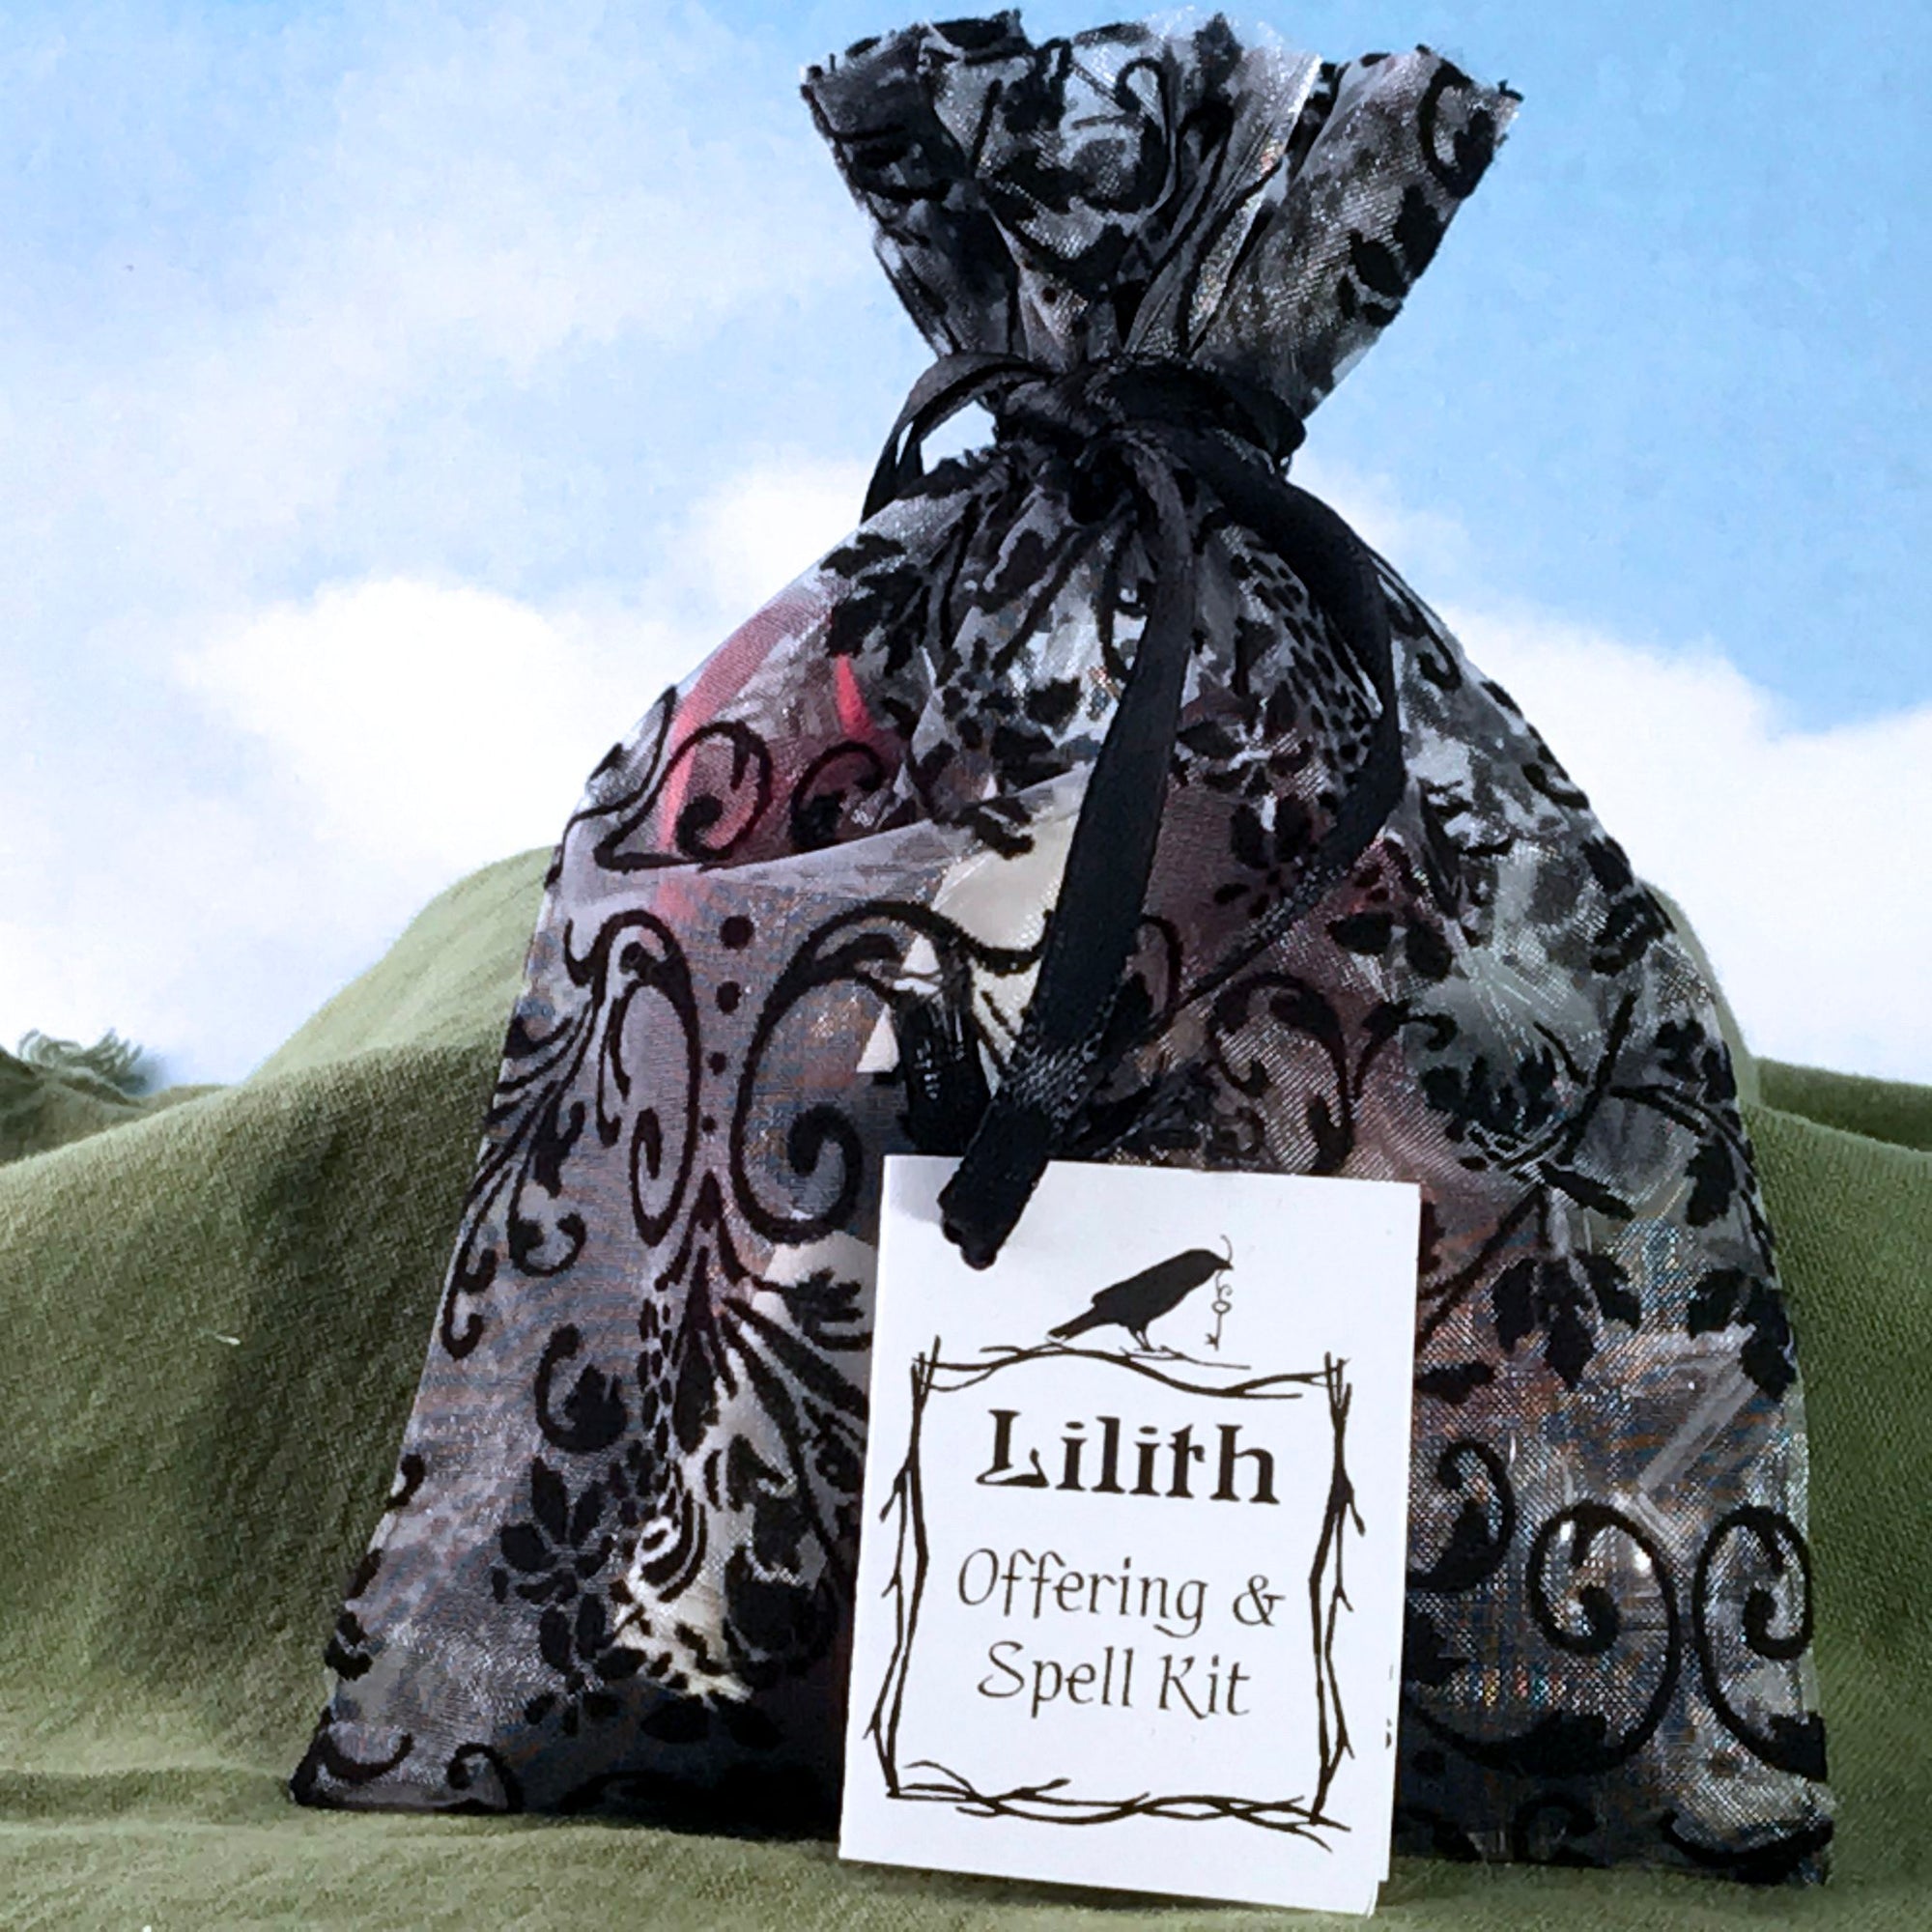 Lilith Offering & Spell Kit